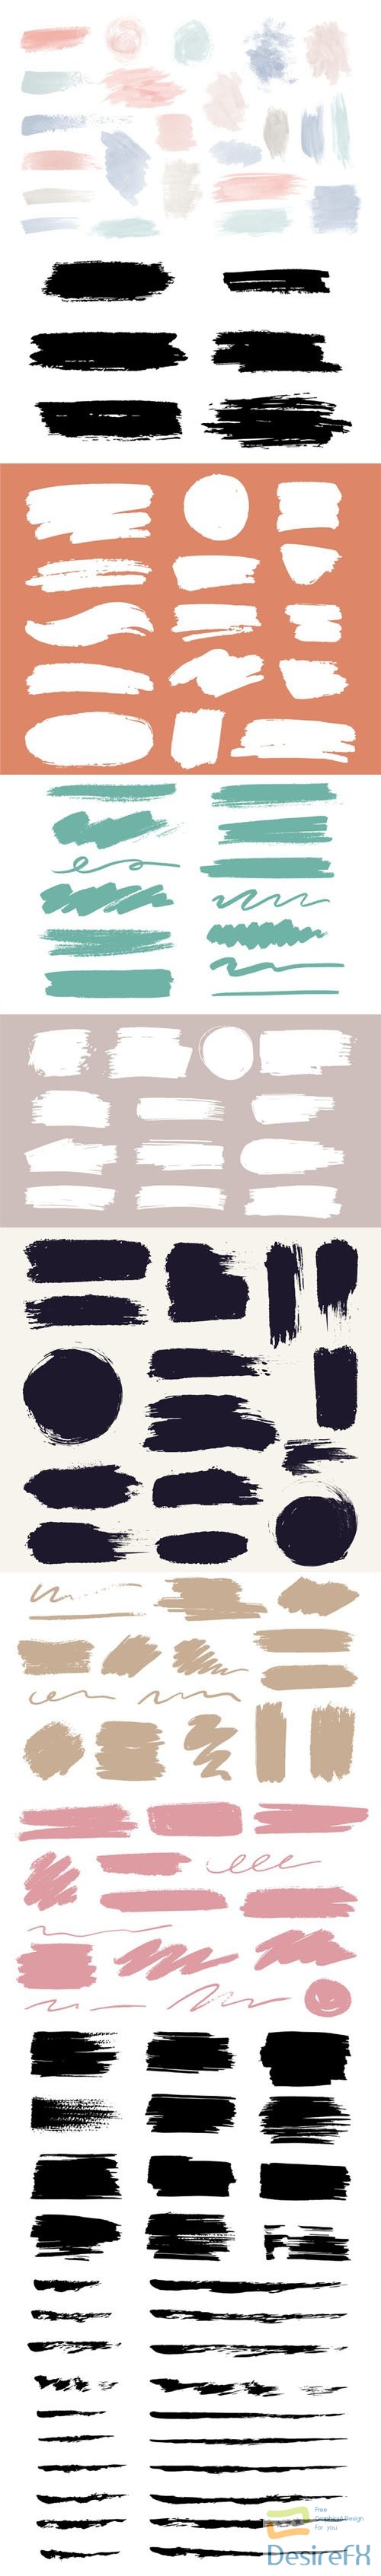 146 Colorful Ink Brush Stroke Vector Templates